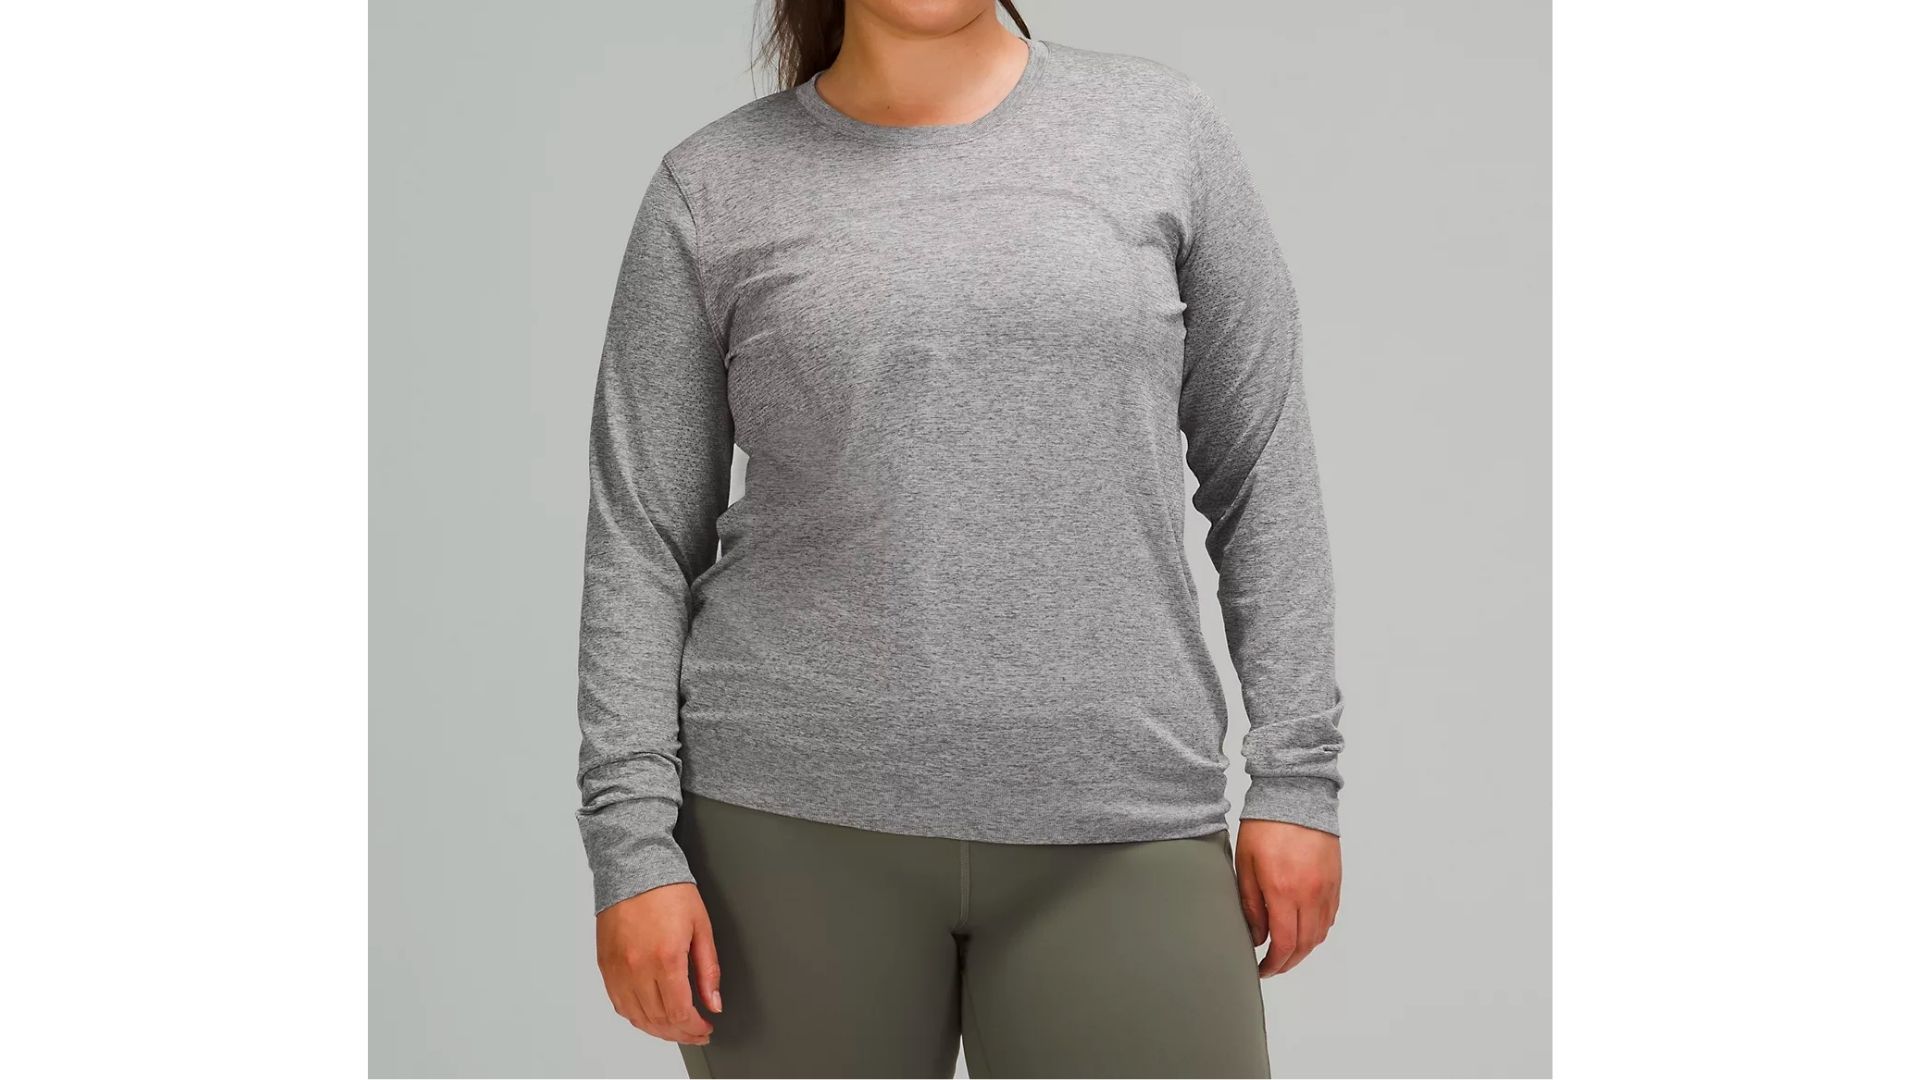 Best Workout Clothes for Women Over 50